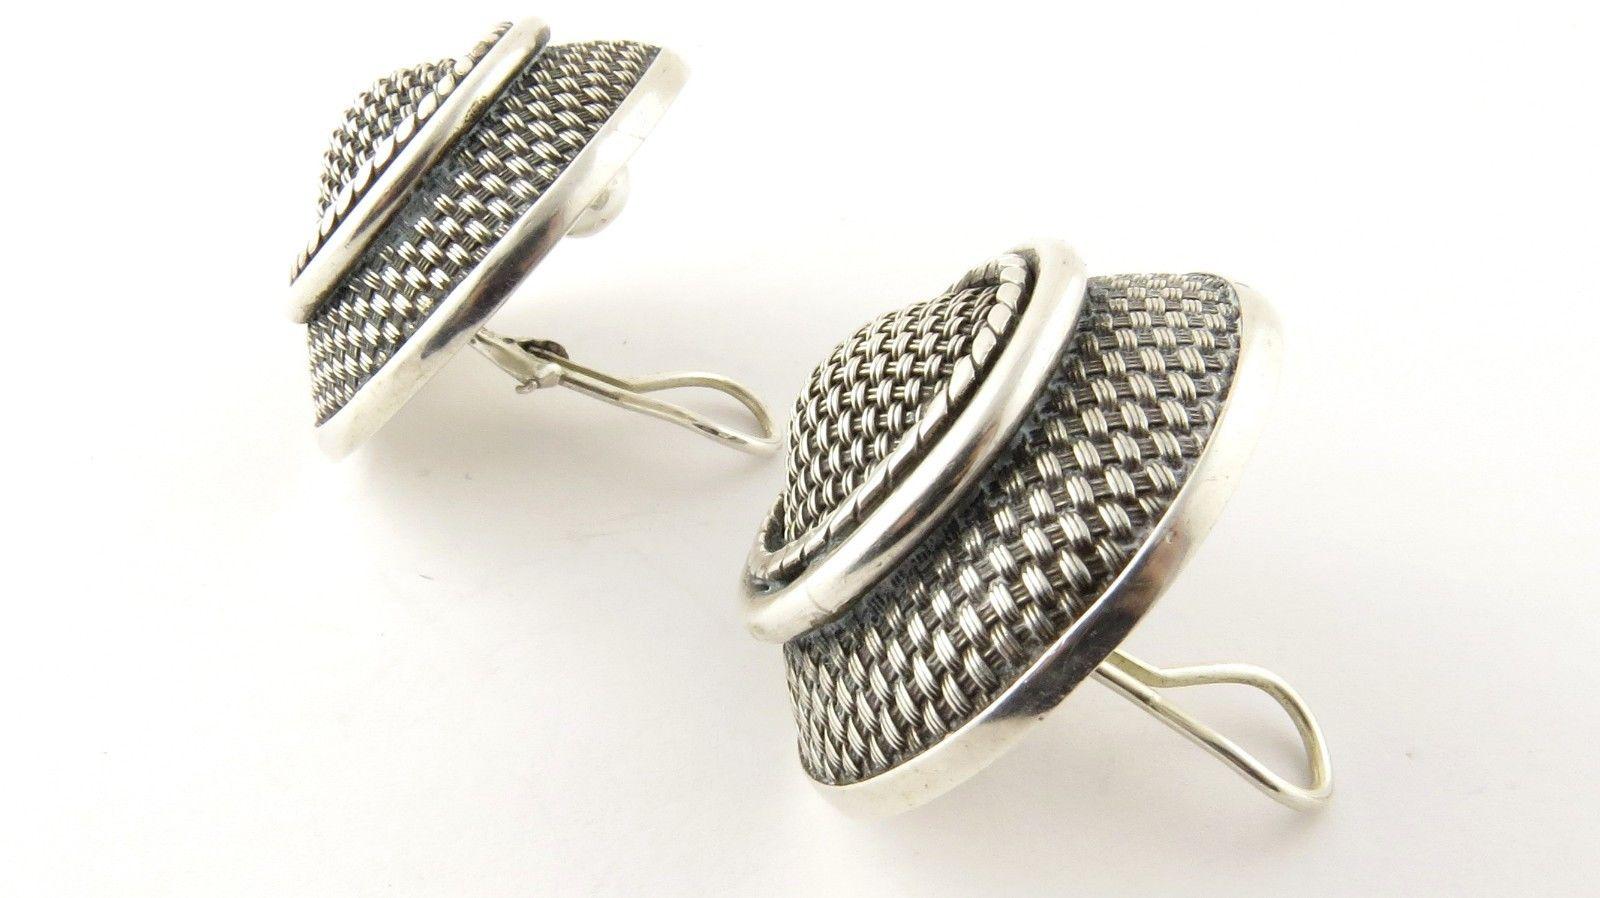 John Hardy Sterling Silver Large Round Mesh Button Earrings Clip On

These authentic John Hardy earrings are approx. 36 mm in diameter and 15 mm thick

Stamped 925 Indonesia with John Hardy Hallmark

24.6 dwt / 38.2 g

Very good pre owned condition.
